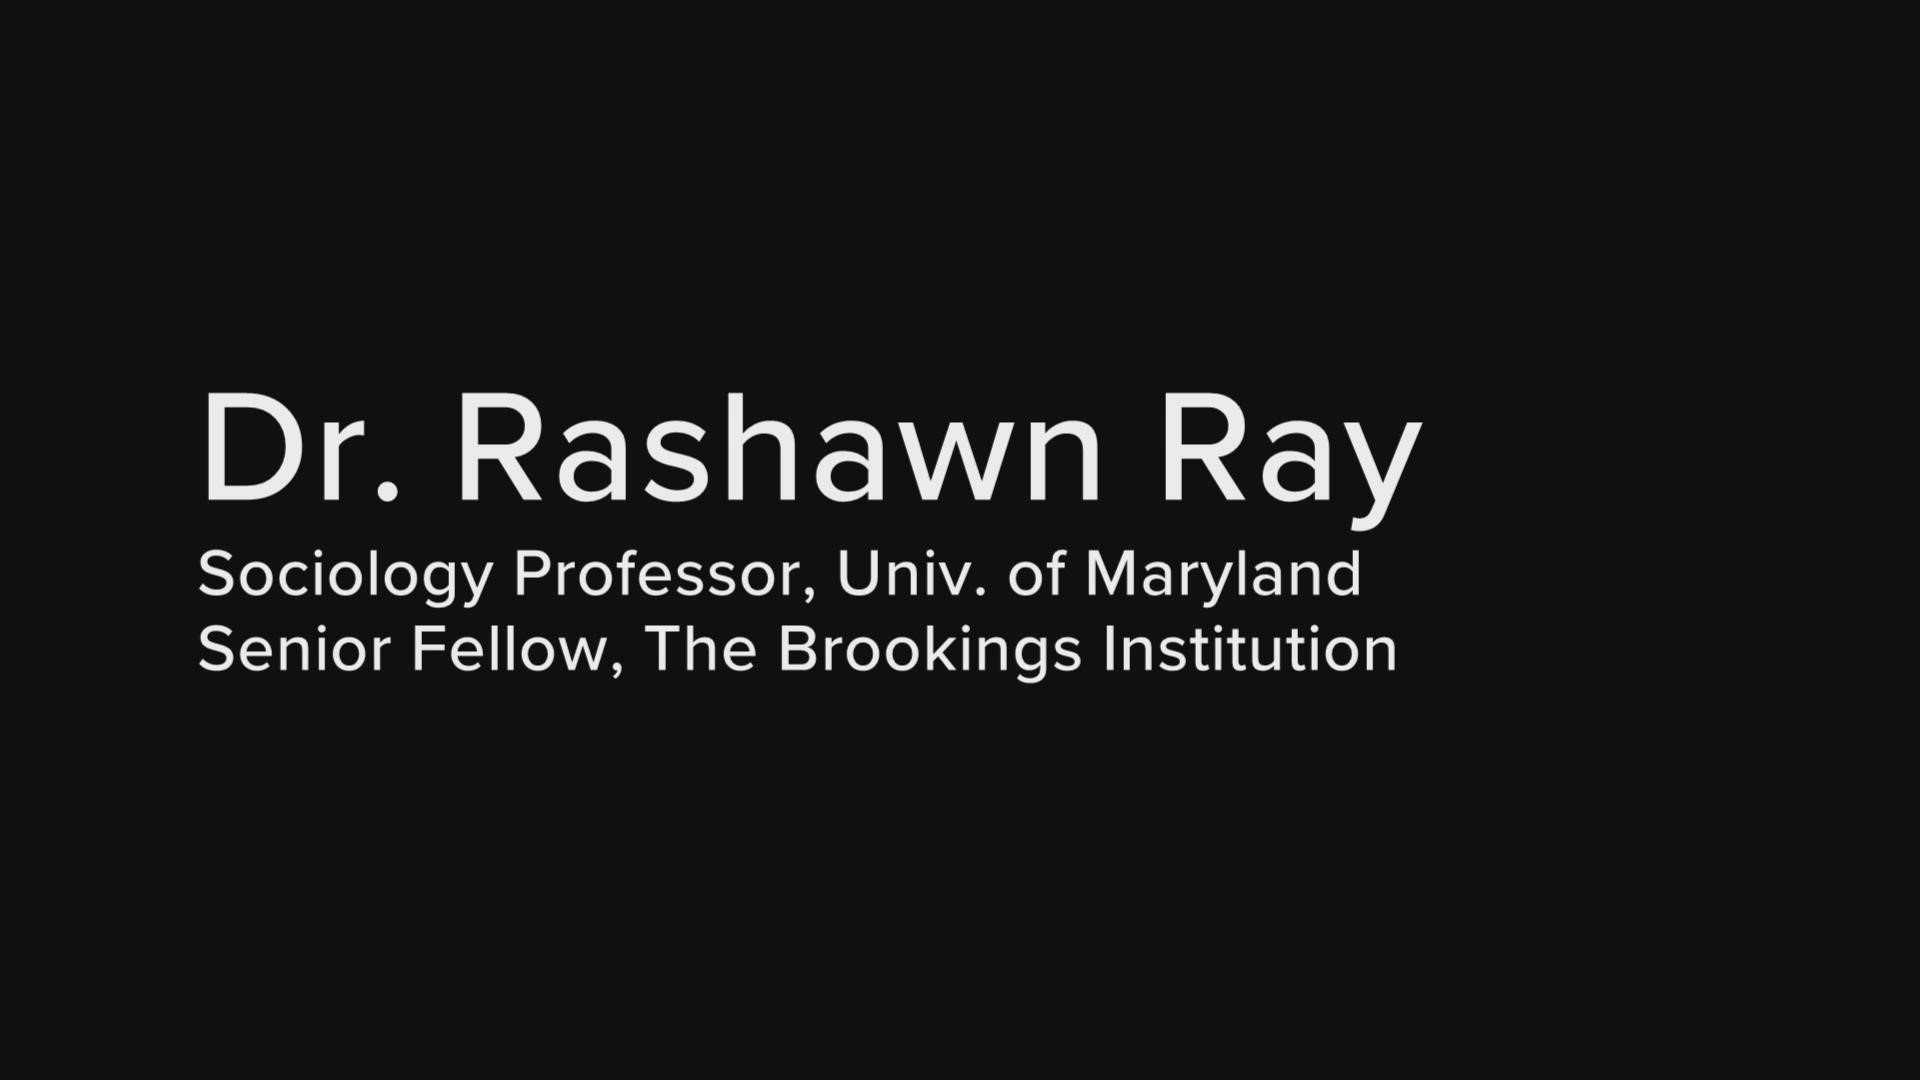 Dr. Rashawn Ray, a sociology professor at the University of Maryland, makes the case for reparations in American communities.